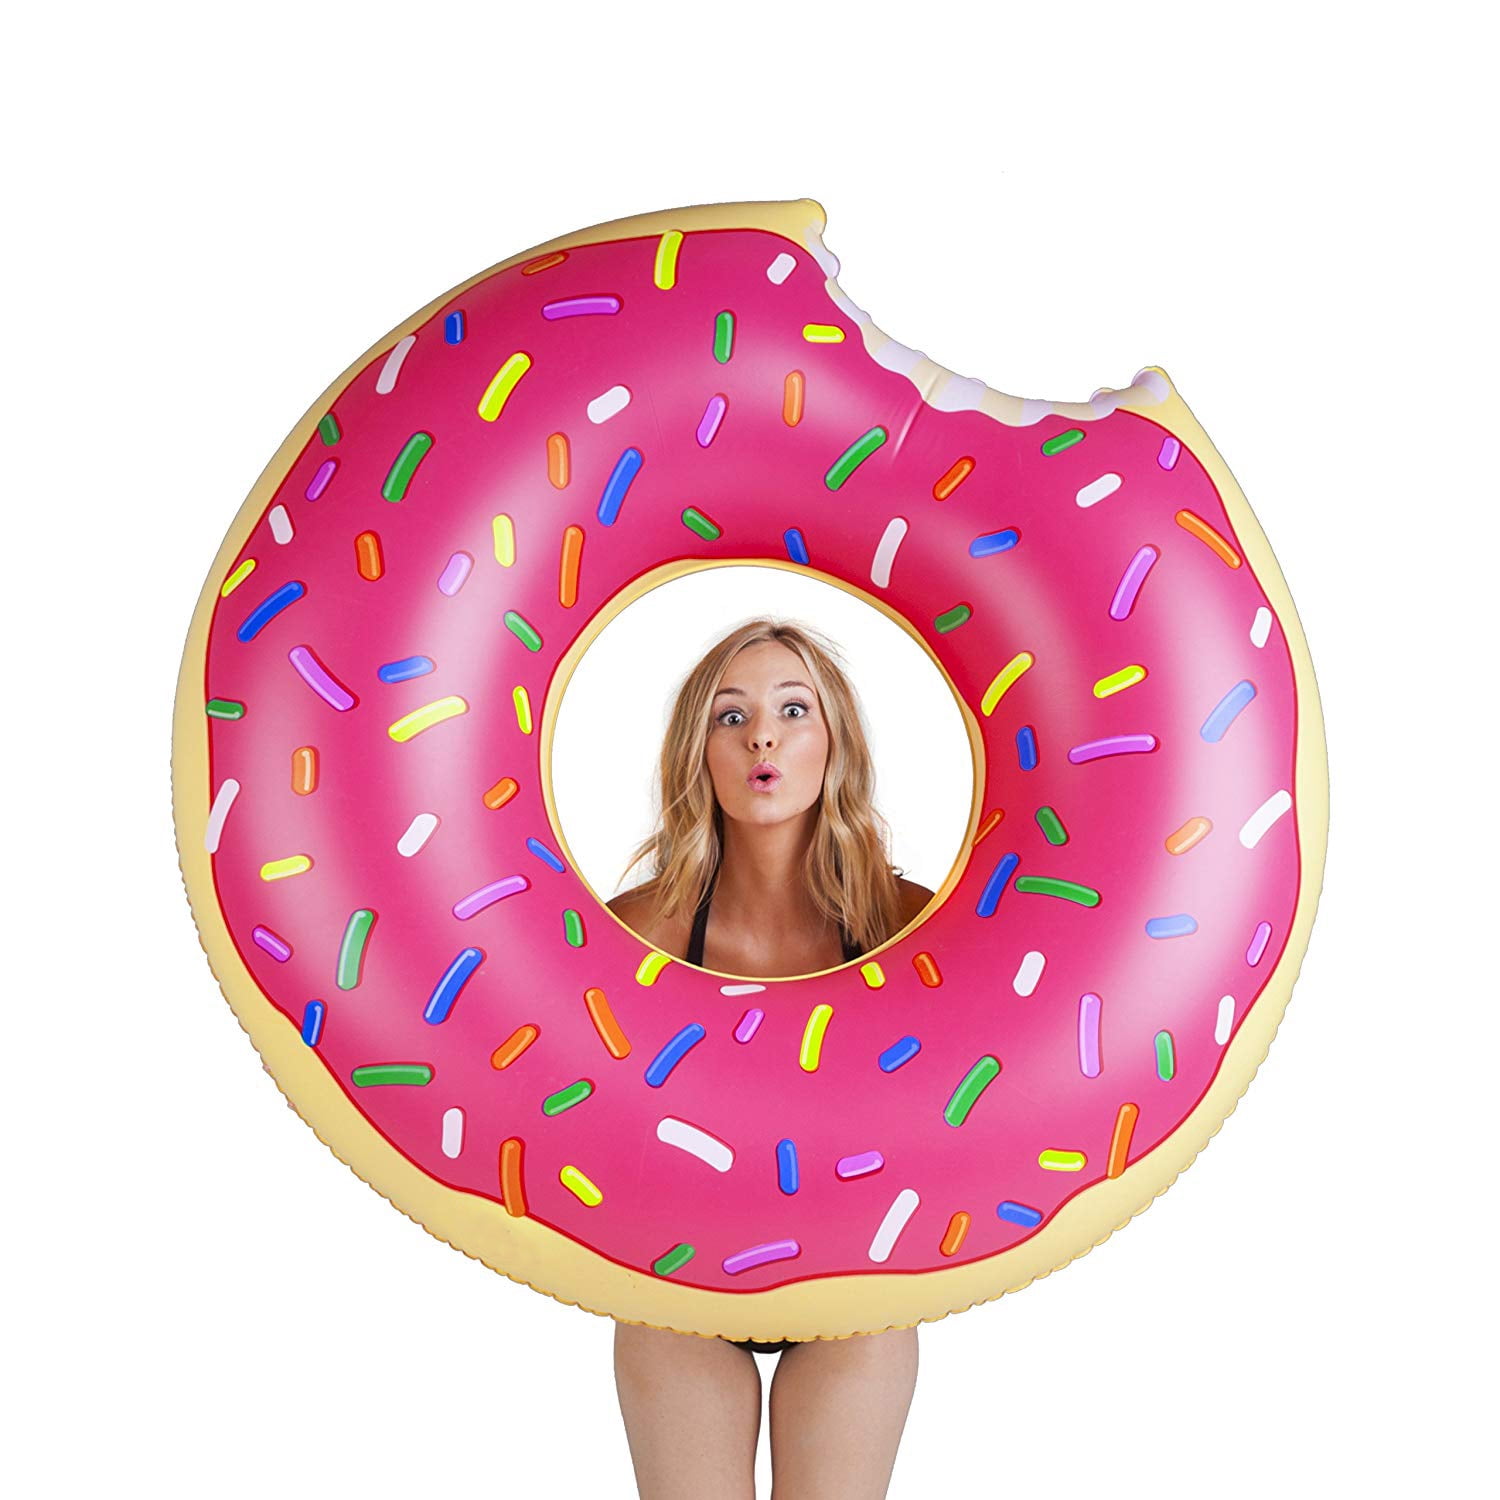 120cm Giant Inflatable Donut Pool Float Raft Swimming Tube Ring for Adults and Kids Strawberry AMH 4ft Patch kit Include